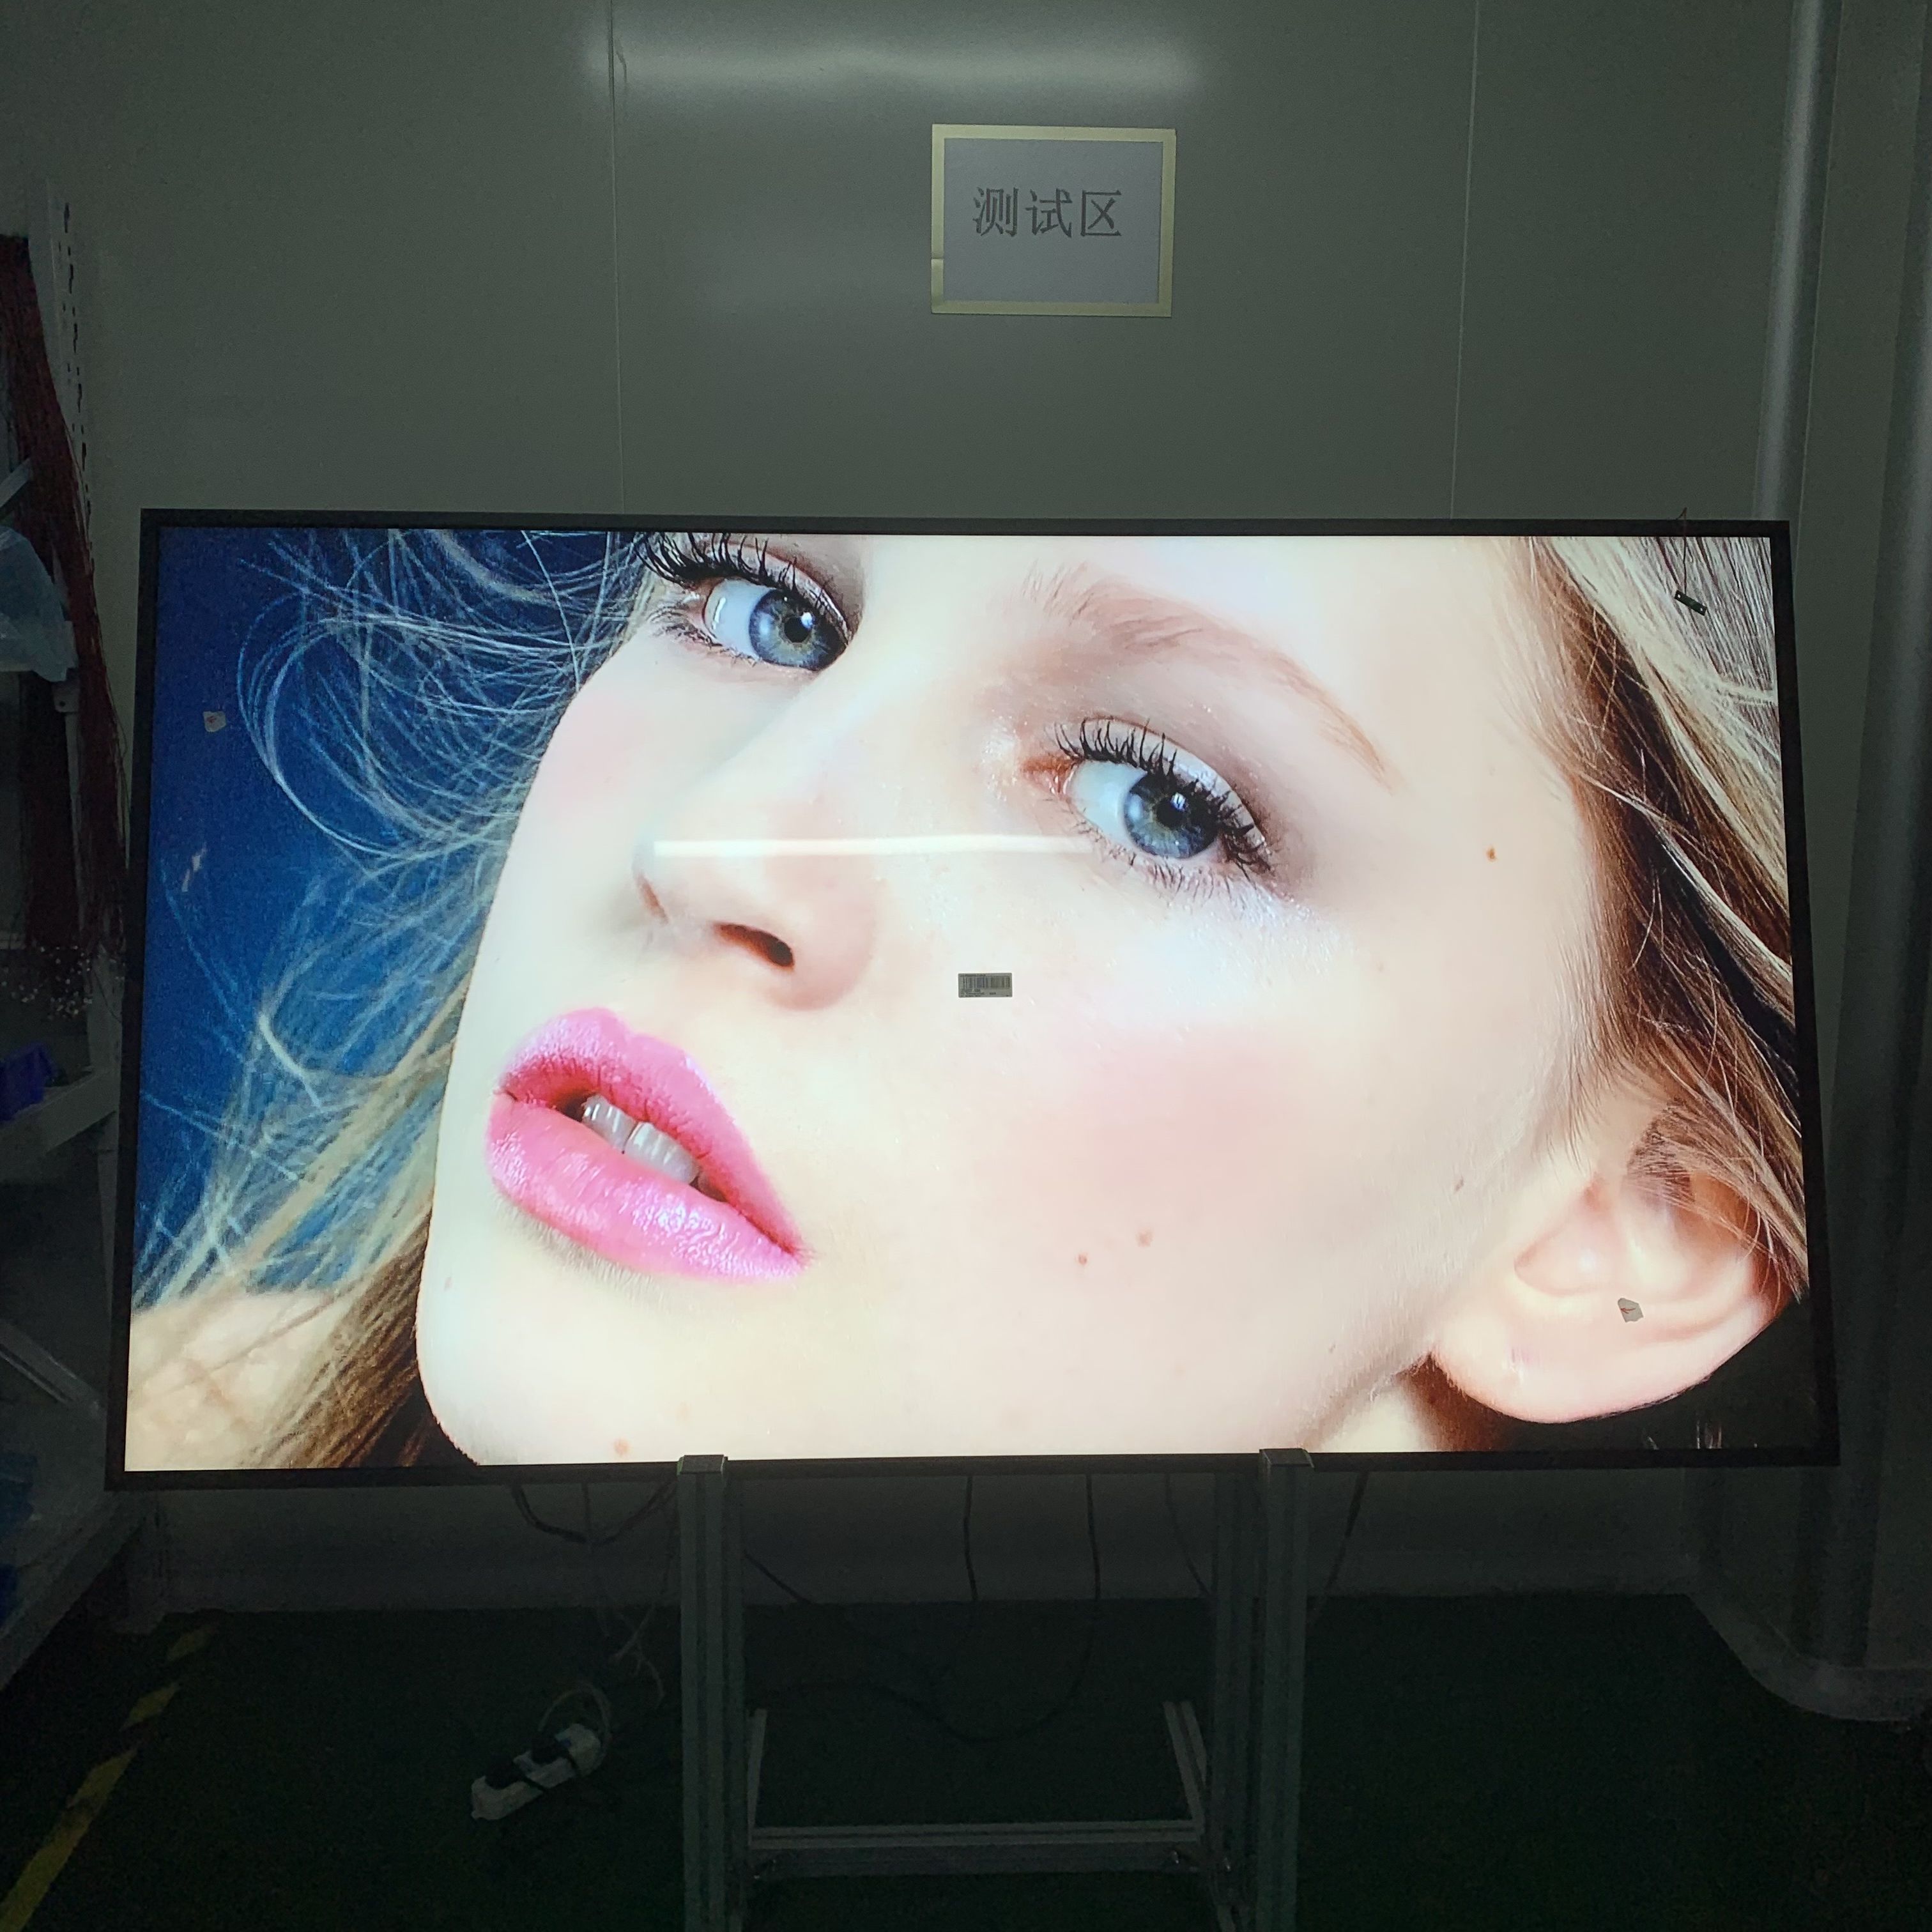 High Resolution 75inch 2000nits High Brightness LCD Monitor Panel Module Screen for Window Facing